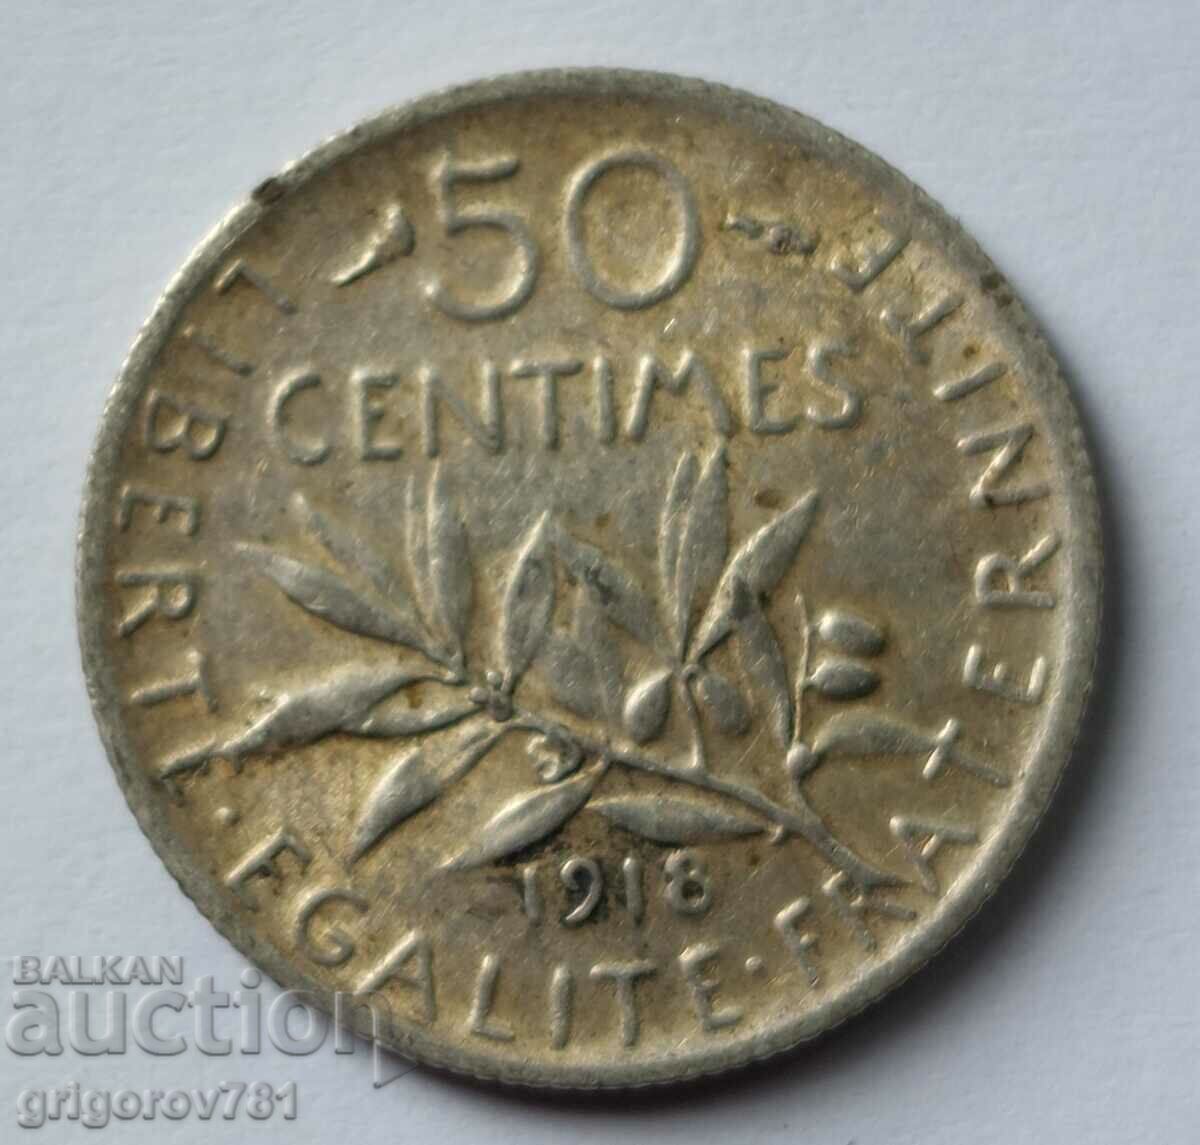 50 centimes silver France 1918 - silver coin №24